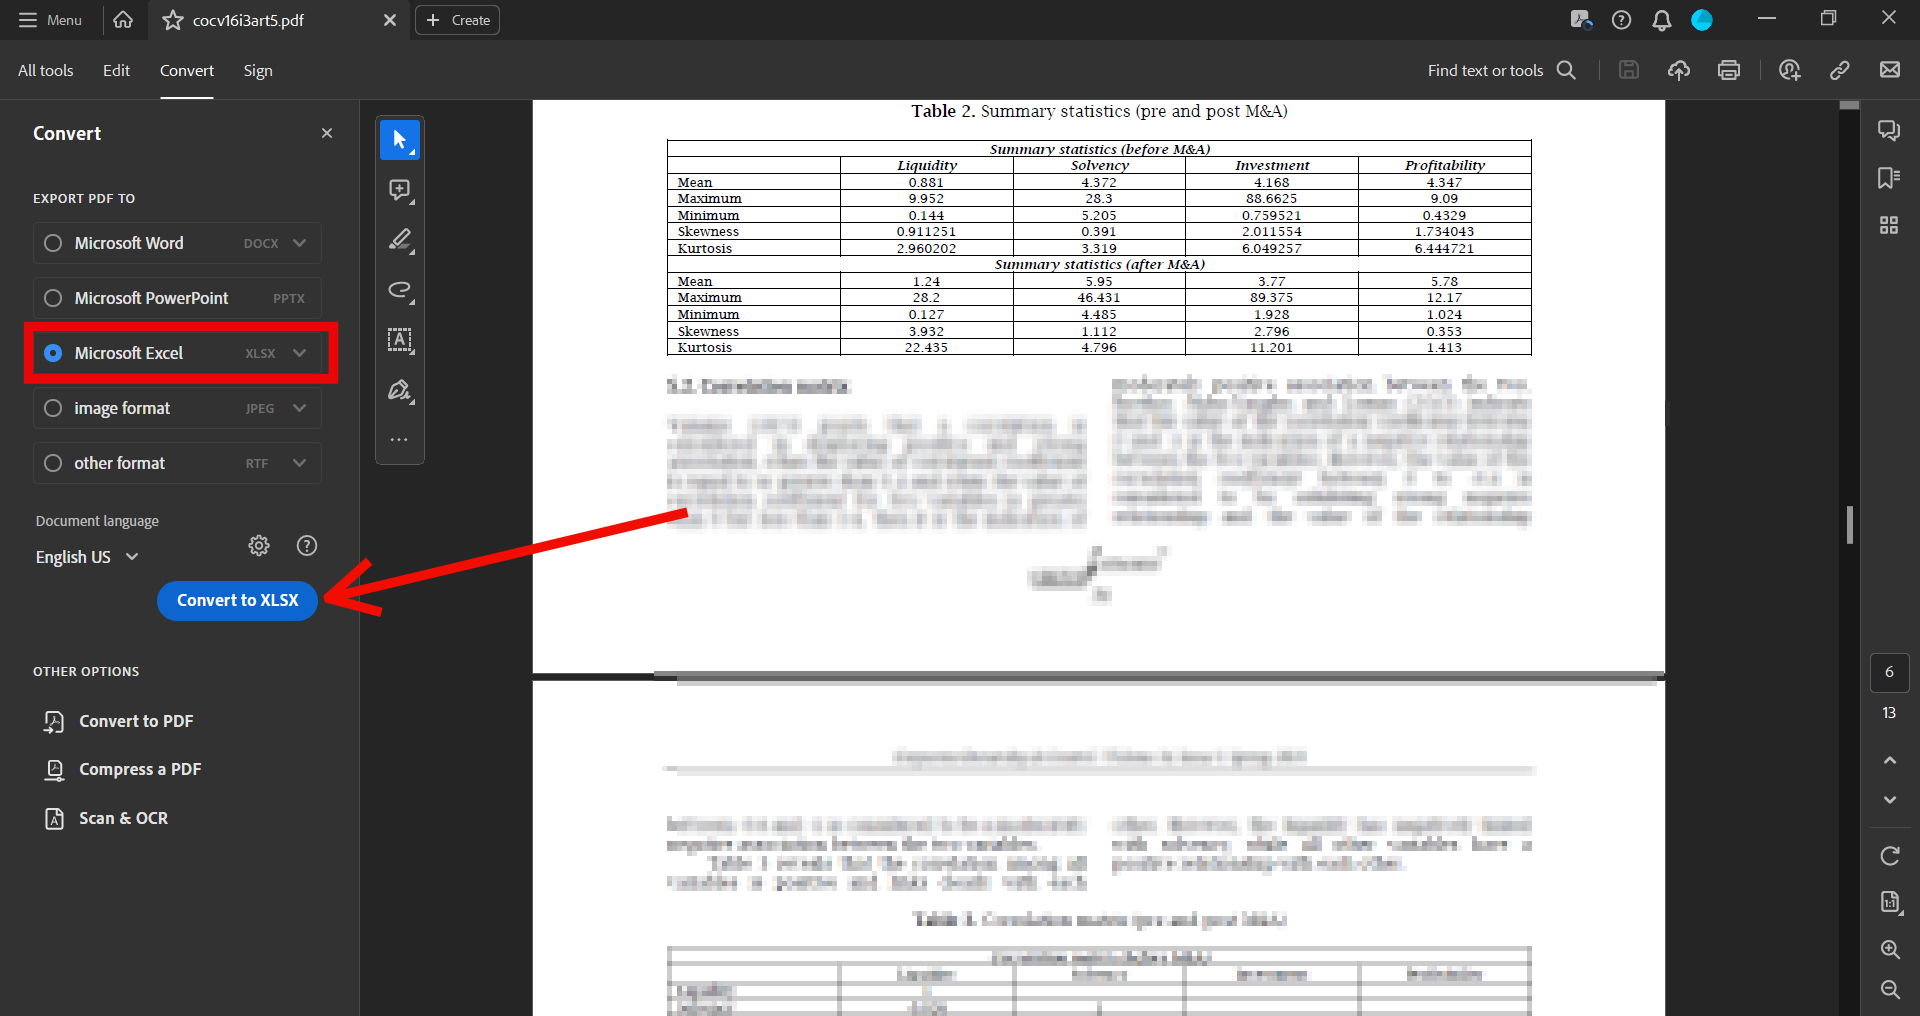 How to access Adobe Acrobat Pro's Export a PDF feature